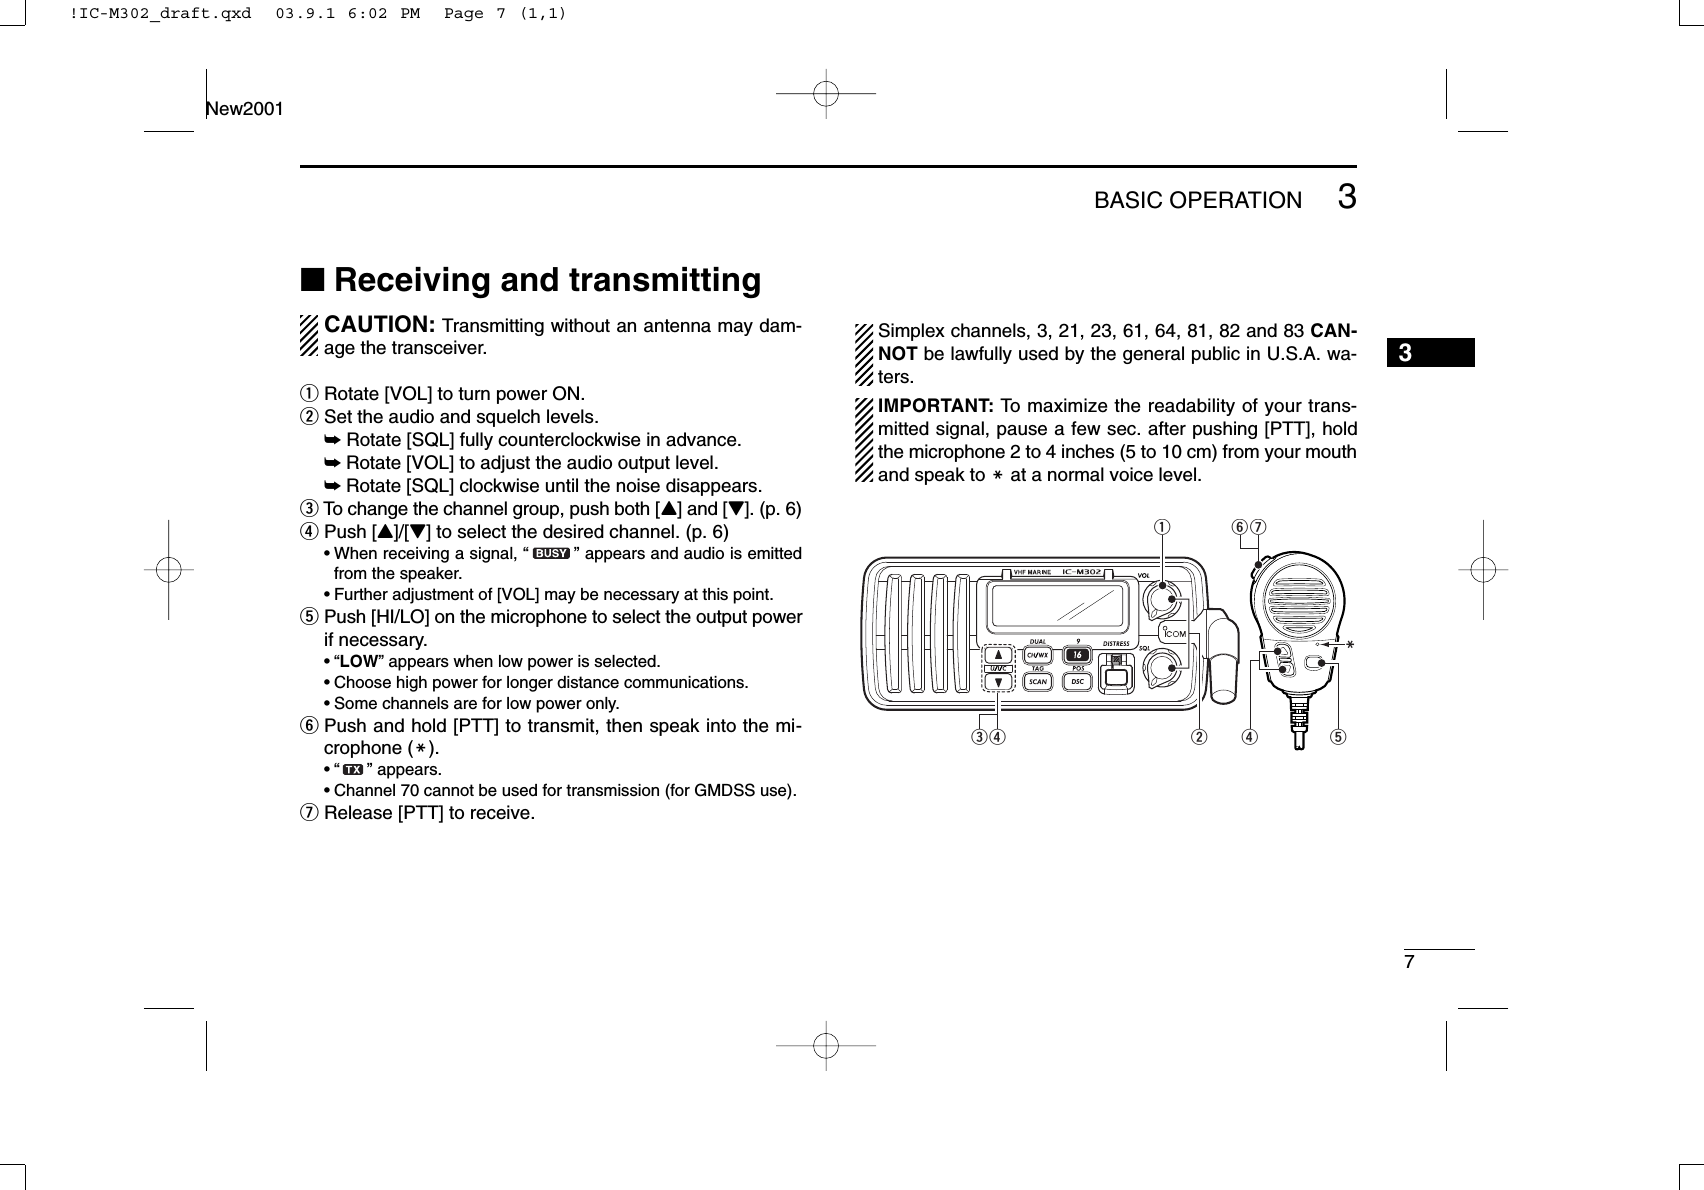 73BASIC OPERATIONNew20013■Receiving and transmittingCAUTION: Transmitting without an antenna may dam-age the transceiver.qRotate [VOL] to turn power ON.wSet the audio and squelch levels.➥Rotate [SQL] fully counterclockwise in advance.➥Rotate [VOL] to adjust the audio output level.➥Rotate [SQL] clockwise until the noise disappears.eTo change the channel group, push both [Y] and [Z]. (p. 6)rPush [Y]/[Z] to select the desired channel. (p. 6)•When receiving a signal, “” appears and audio is emittedfrom the speaker.•Further adjustment of [VOL] may be necessary at this point.tPush [HI/LO] on the microphone to select the output powerif necessary.•“LOW” appears when low power is selected.•Choose high power for longer distance communications.•Some channels are for low power only.yPush and hold [PTT] to transmit, then speak into the mi-crophone (M).•“ ” appears.•Channel 70 cannot be used for transmission (for GMDSS use).uRelease [PTT] to receive.Simplex channels, 3, 21, 23, 61, 64, 81, 82 and 83 CAN-NOT be lawfully used by the general public in U.S.A. wa-ters.IMPORTANT: To maximize the readability of your trans-mitted signal, pause a few sec. after pushing [PTT], holdthe microphone 2 to 4 inches (5 to 10 cm) from your mouthand speak to Mat a normal voice level.uwr treMqy!IC-M302_draft.qxd  03.9.1 6:02 PM  Page 7 (1,1)